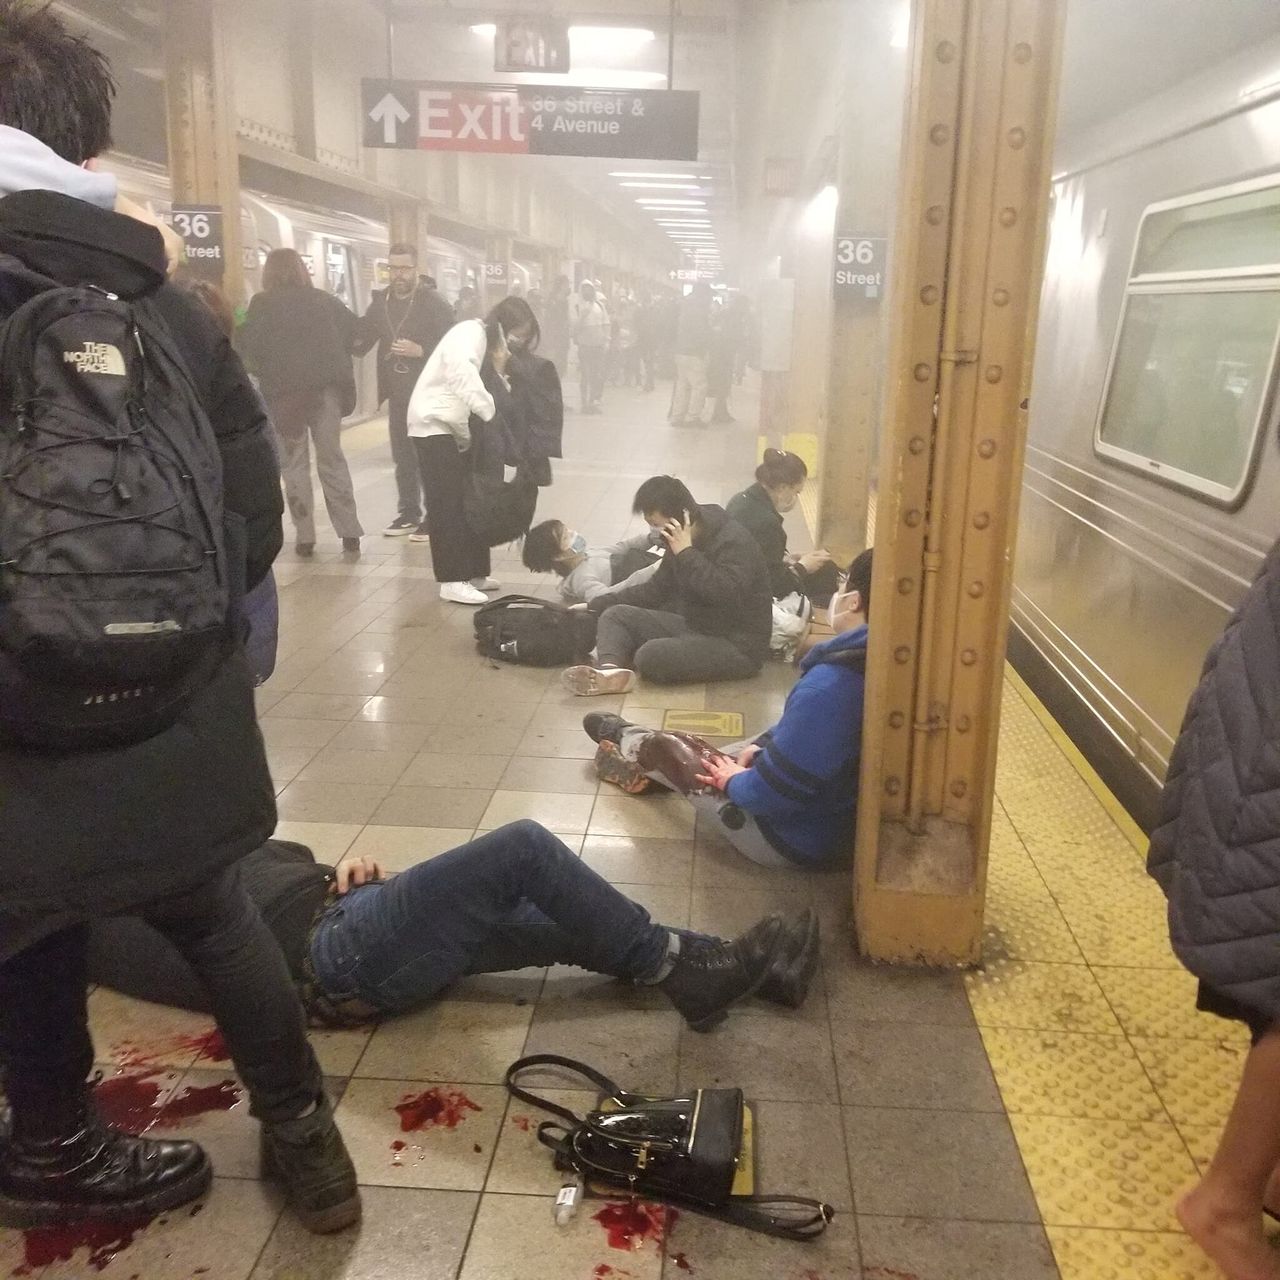 Wounded people at the 36th Street subway station after the shooting.